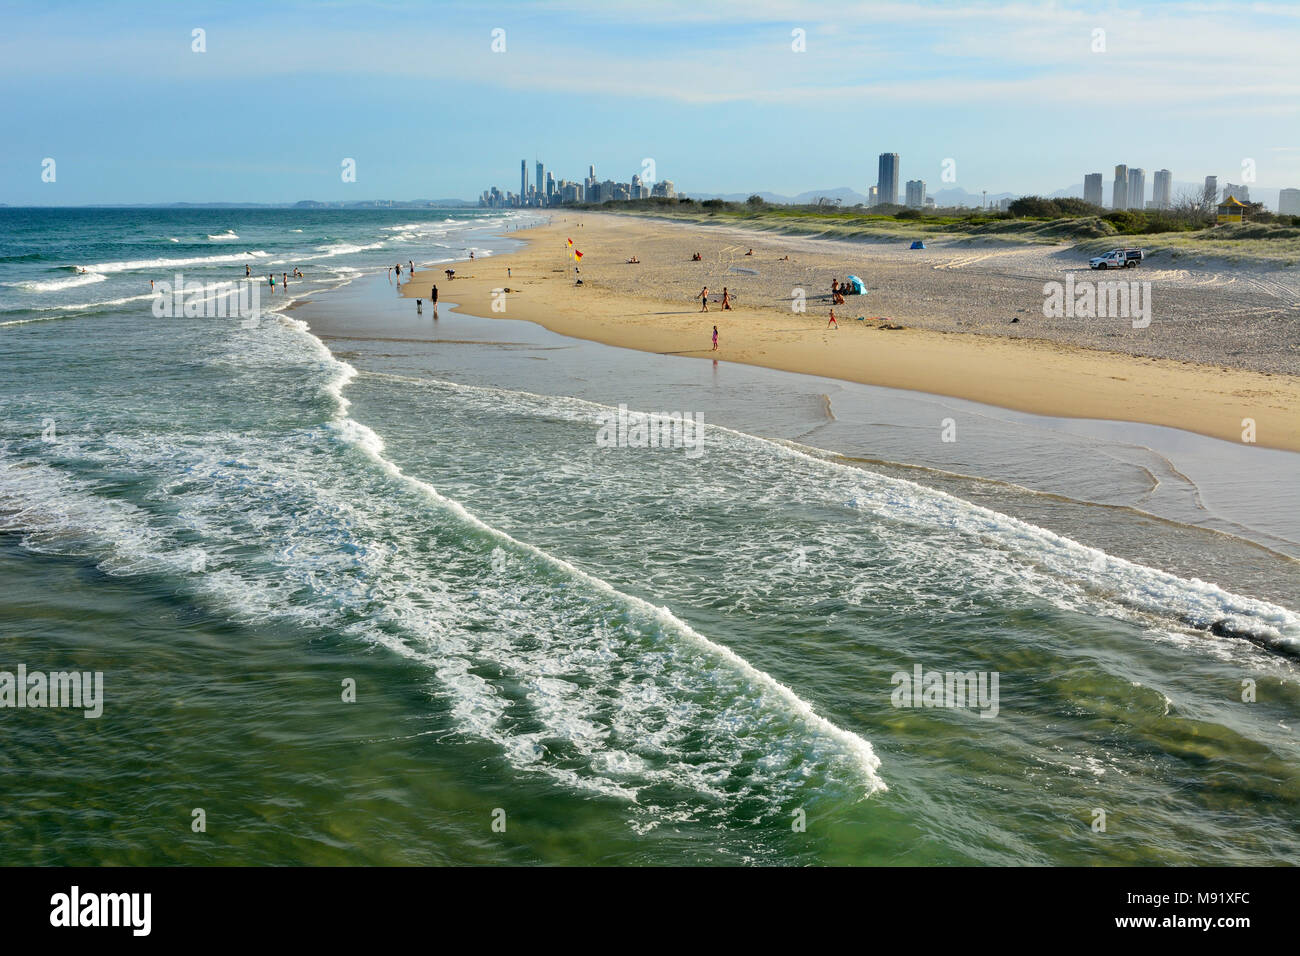 Main Beach, Gold Coast, Queensland, Australia - January 10, 2018. Beach at the Spit, with people and skyscrapers of Surfers Paradise in the distance. Stock Photo